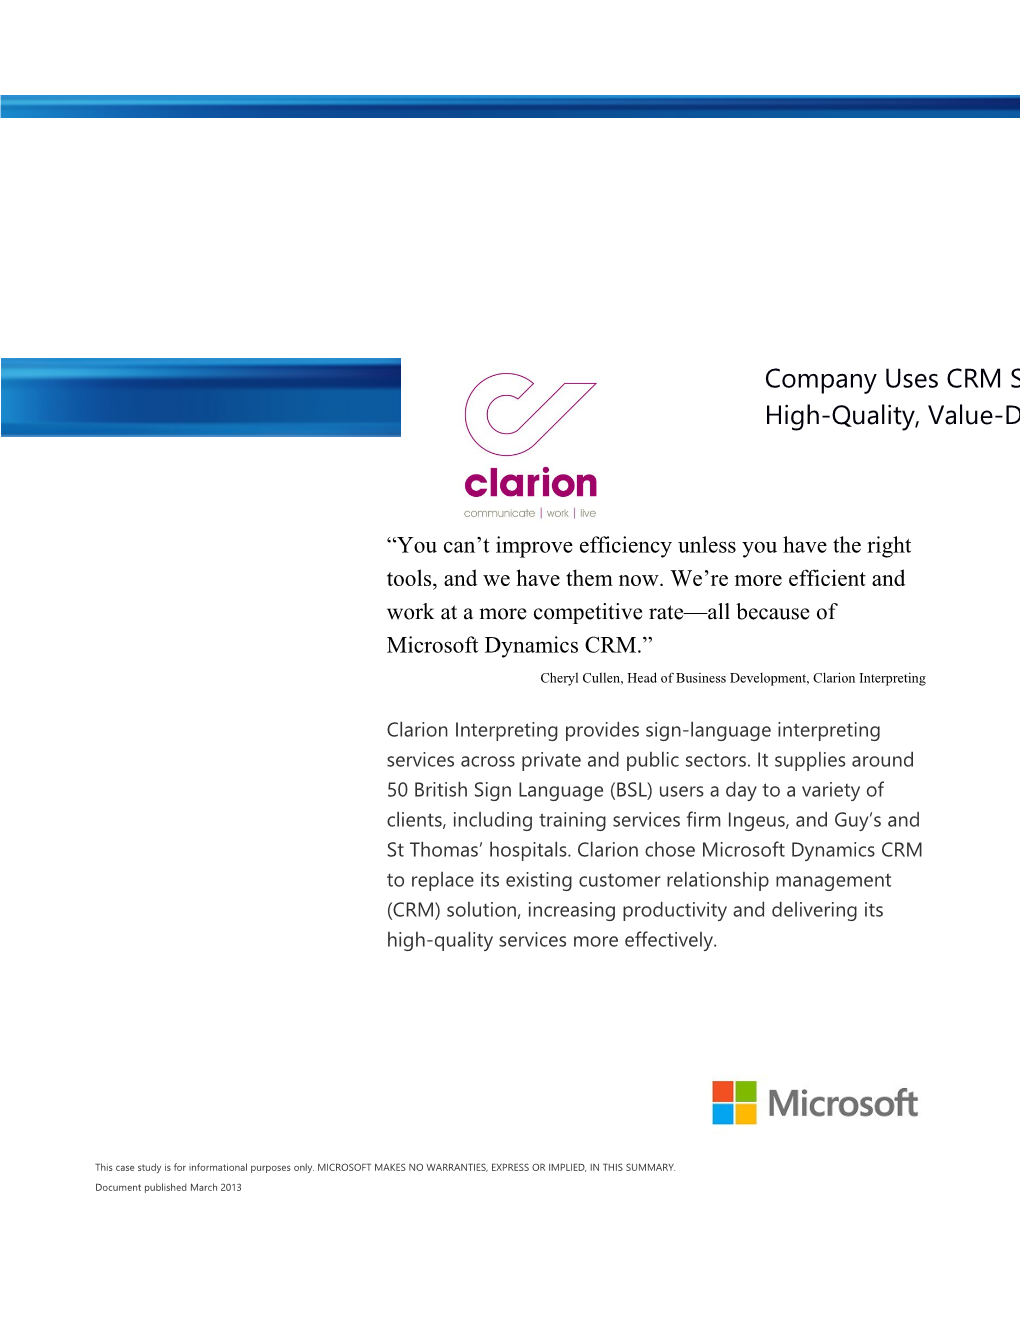 Writeimage CSB Microsoft Dynamics CRM Delights and Empowers High-Quality, Value-Driven